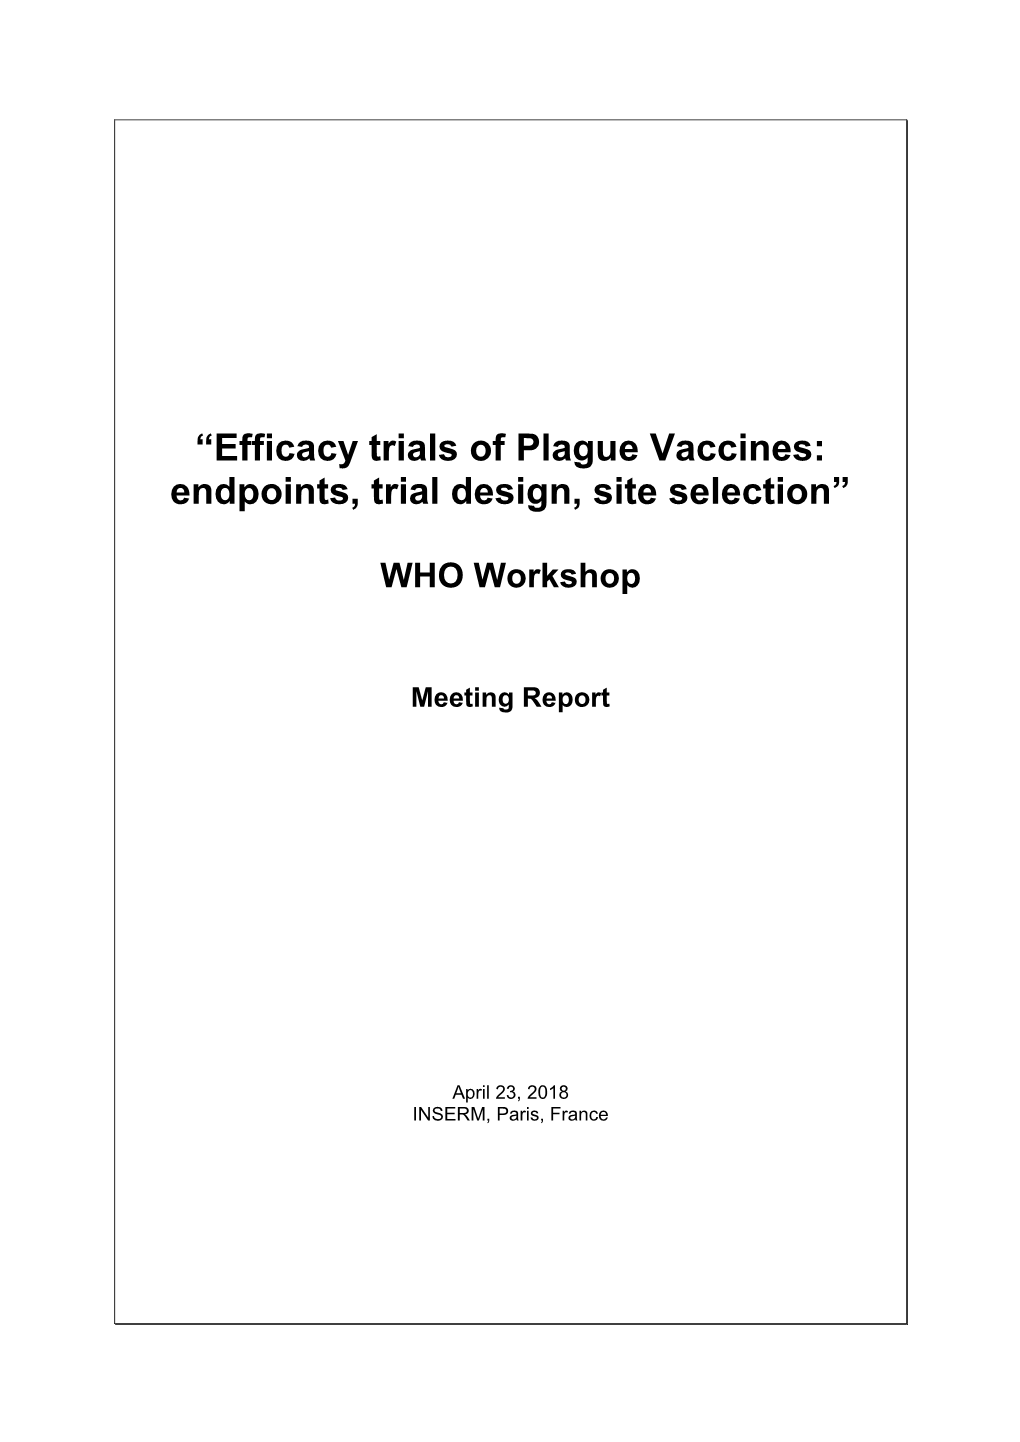 “Efficacy Trials of Plague Vaccines: Endpoints, Trial Design, Site Selection”